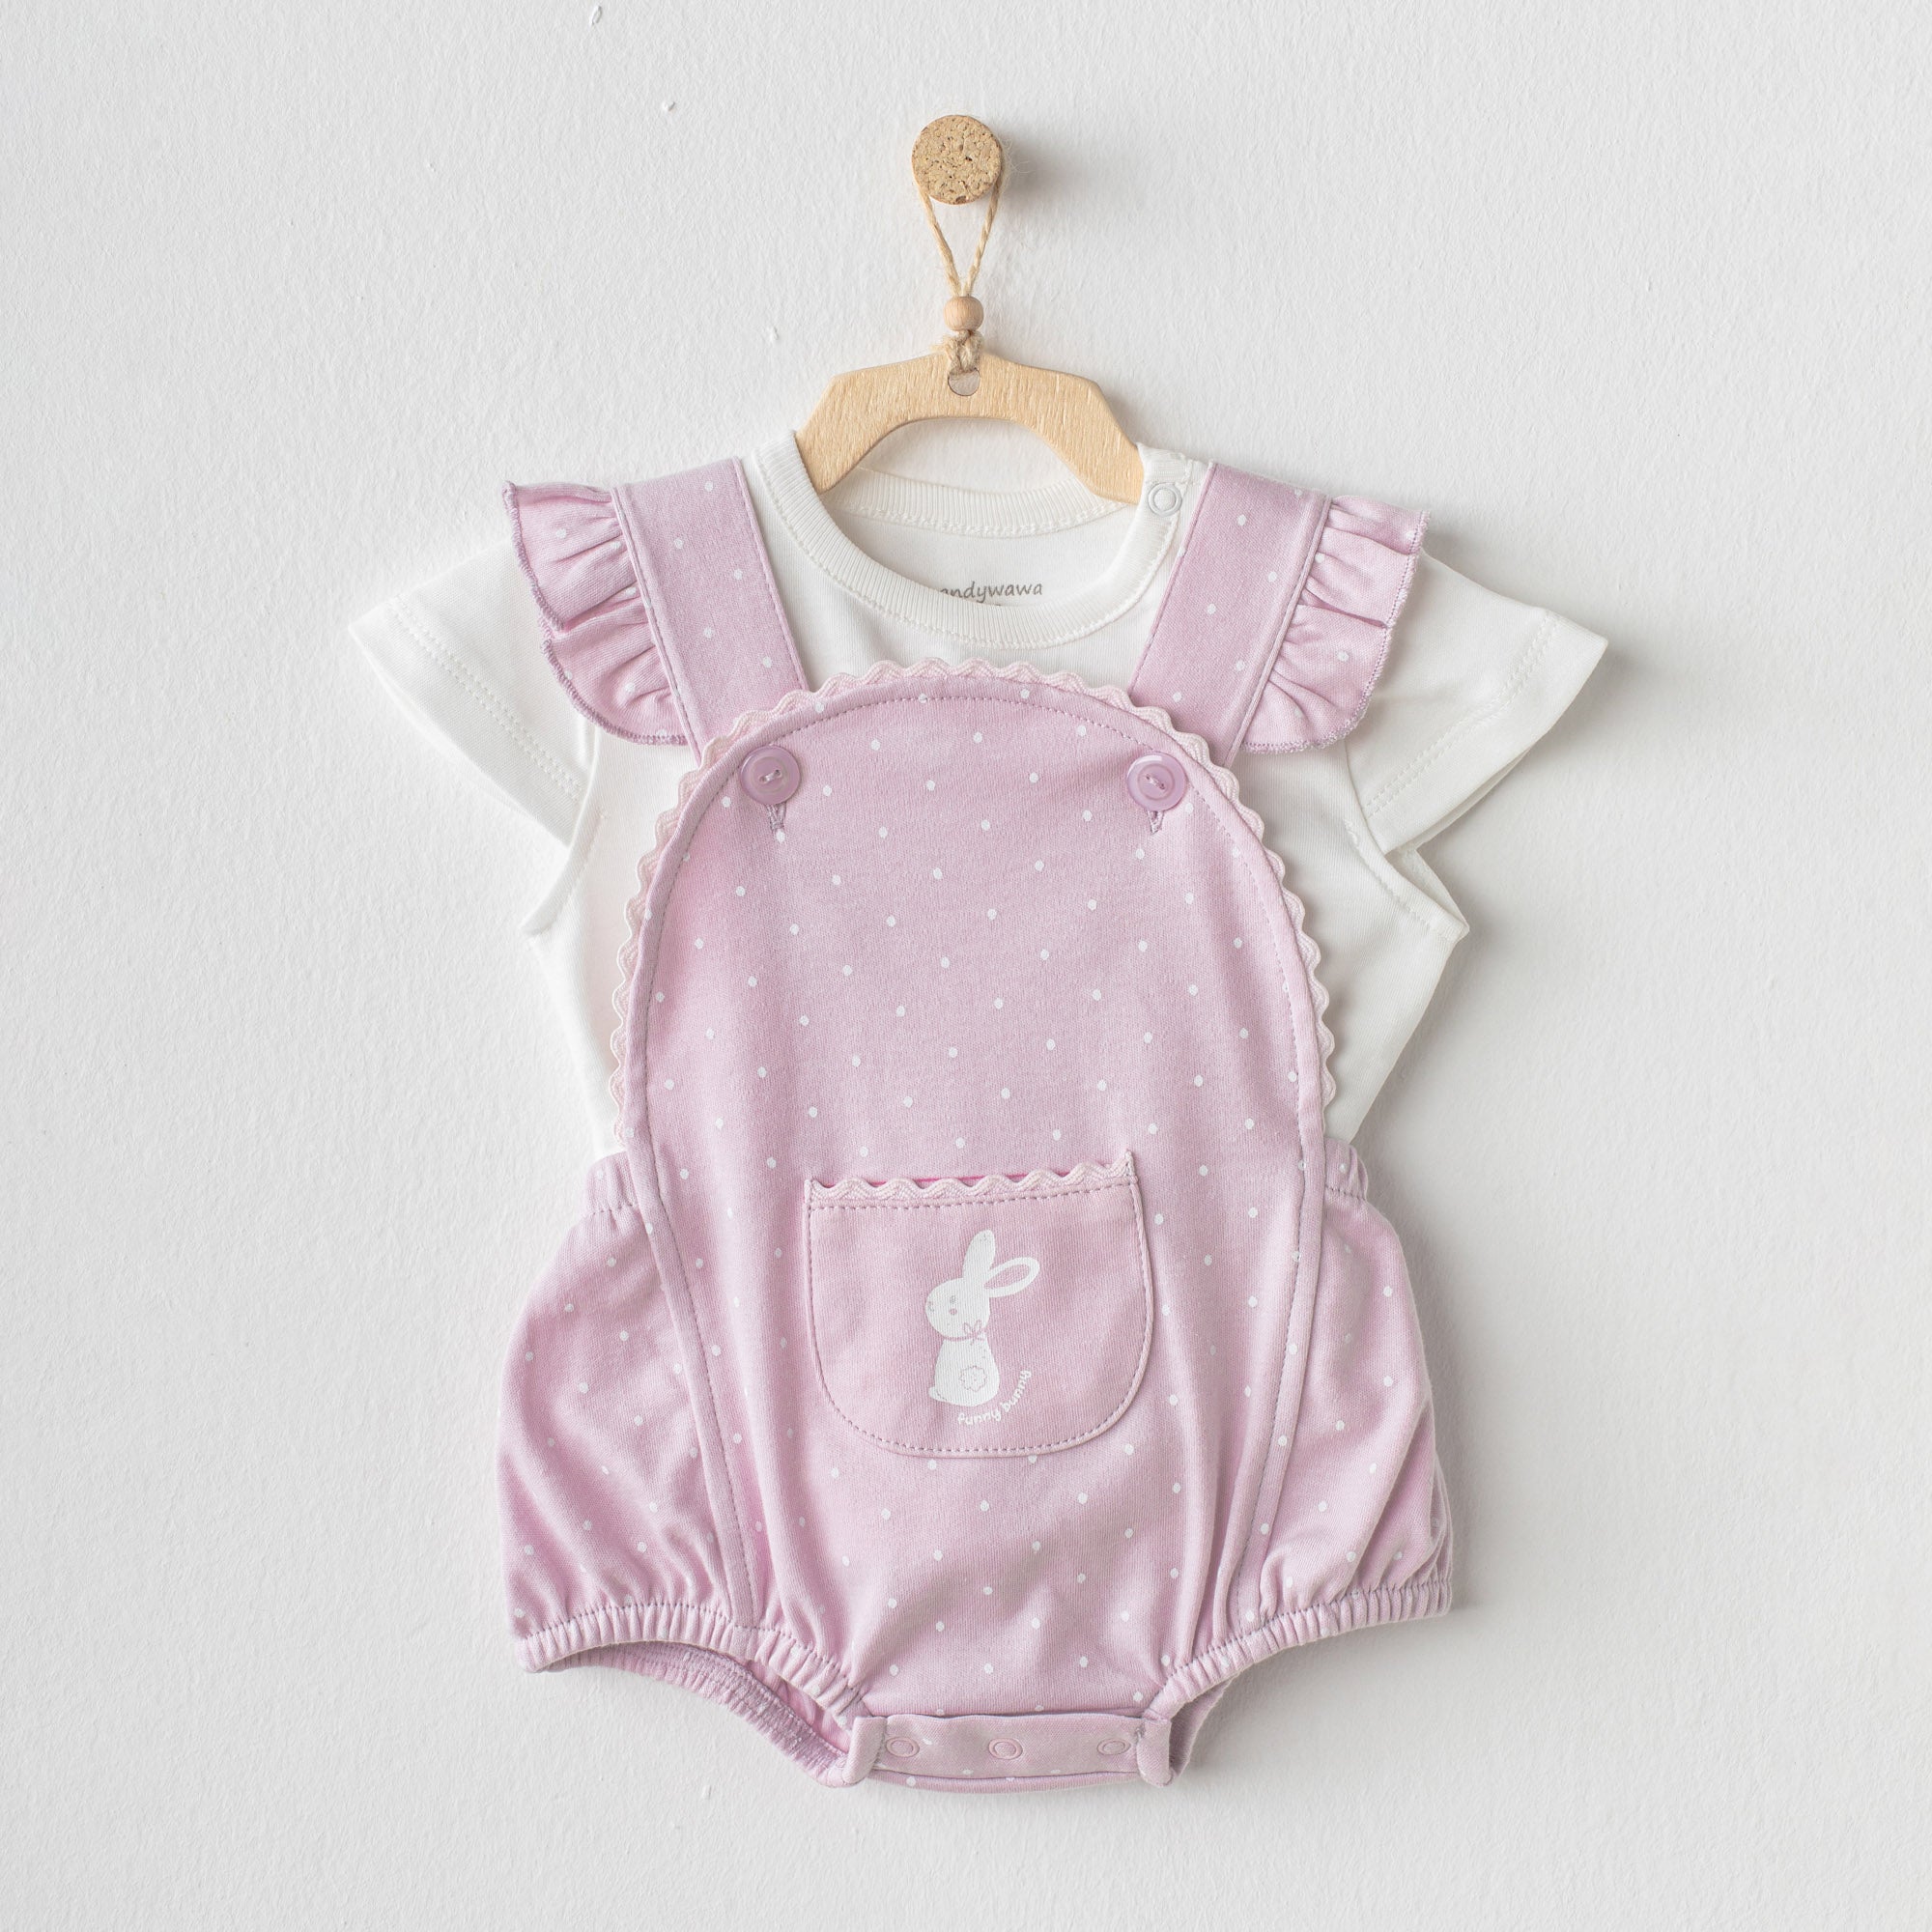 Funny Bunny Casual Romper Set - Funny Bunny Casual Romper Set - 3-6 Months - Andywawa - Melymod